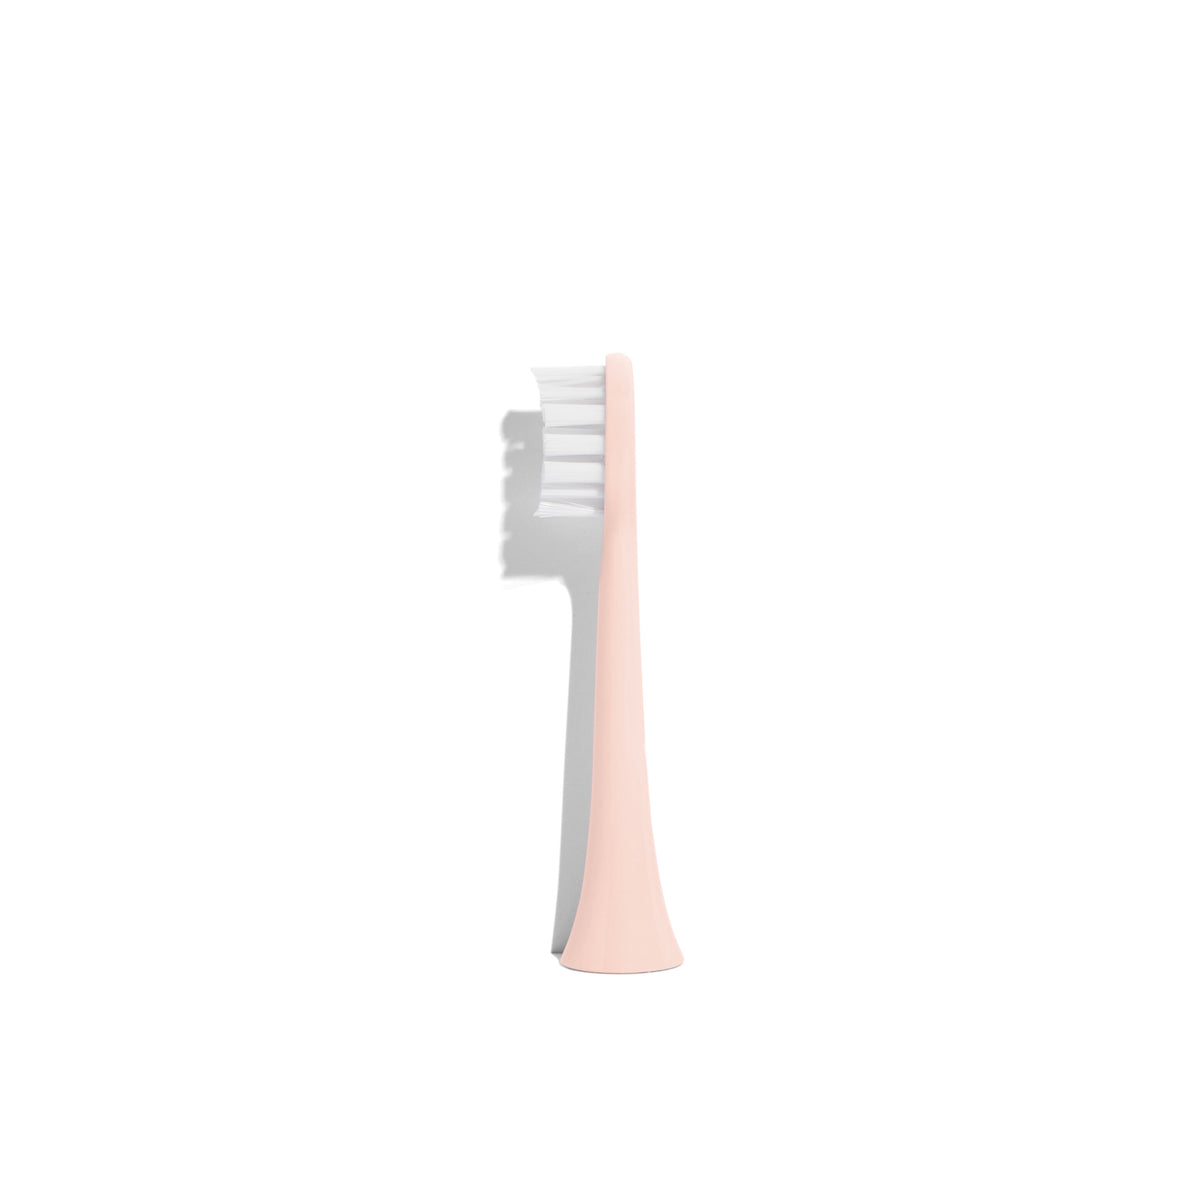 Gem Electric Toothbrush Replacement Heads: Watermelon